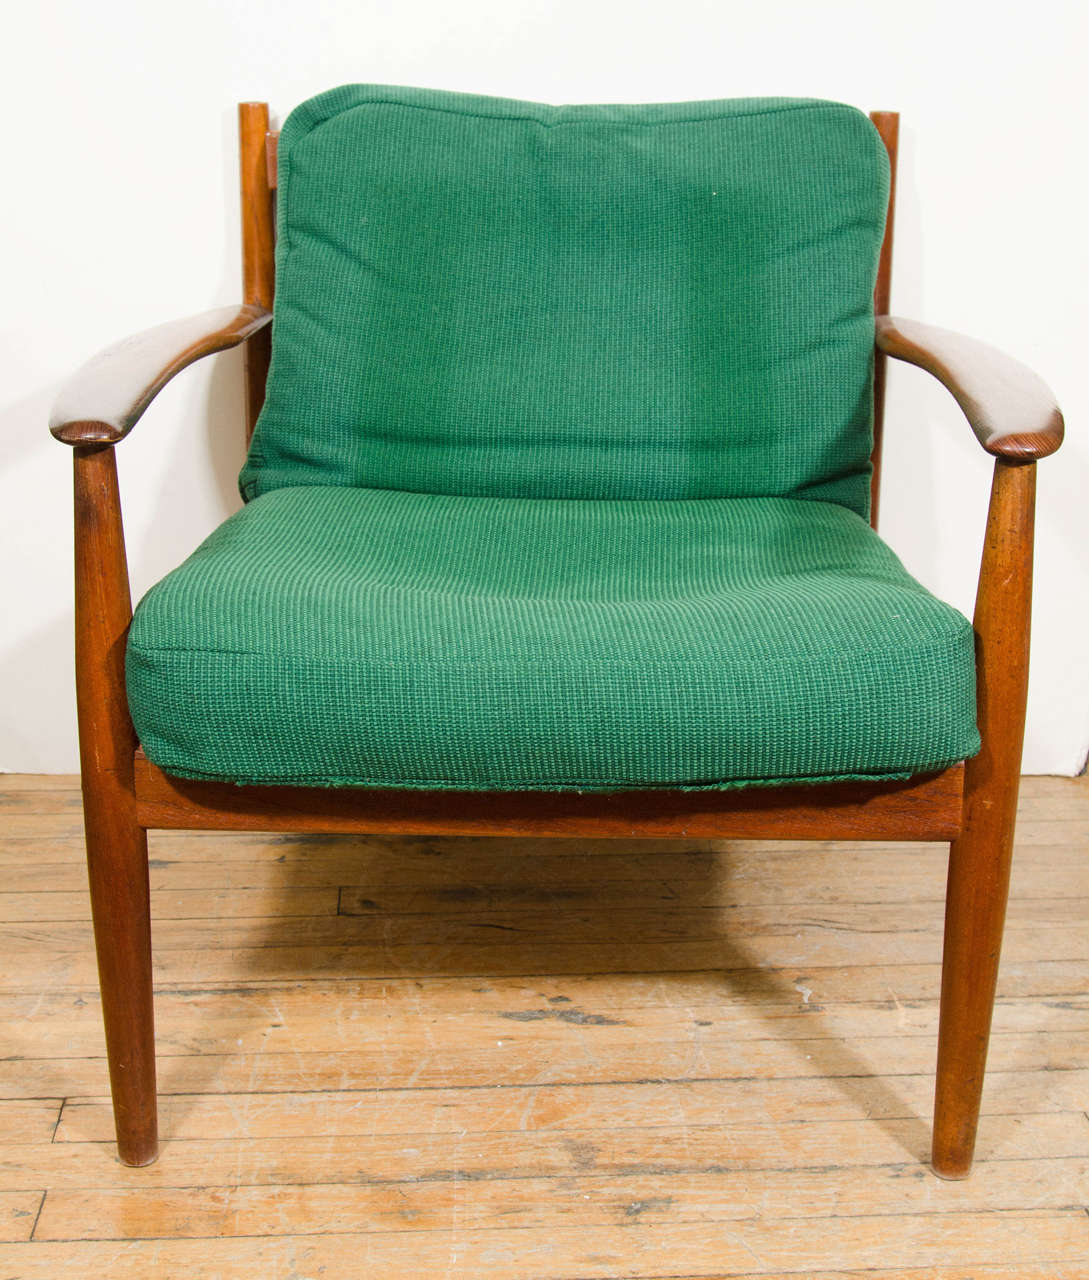 A Danish modern pair of easy lounge chairs upholstered in Kelly green by Grete Jalk for France & Son. Marked #128 on the bottom. Good vintage condition with age appropriate wear. A few scuffs to legs, and a nick to the arm.